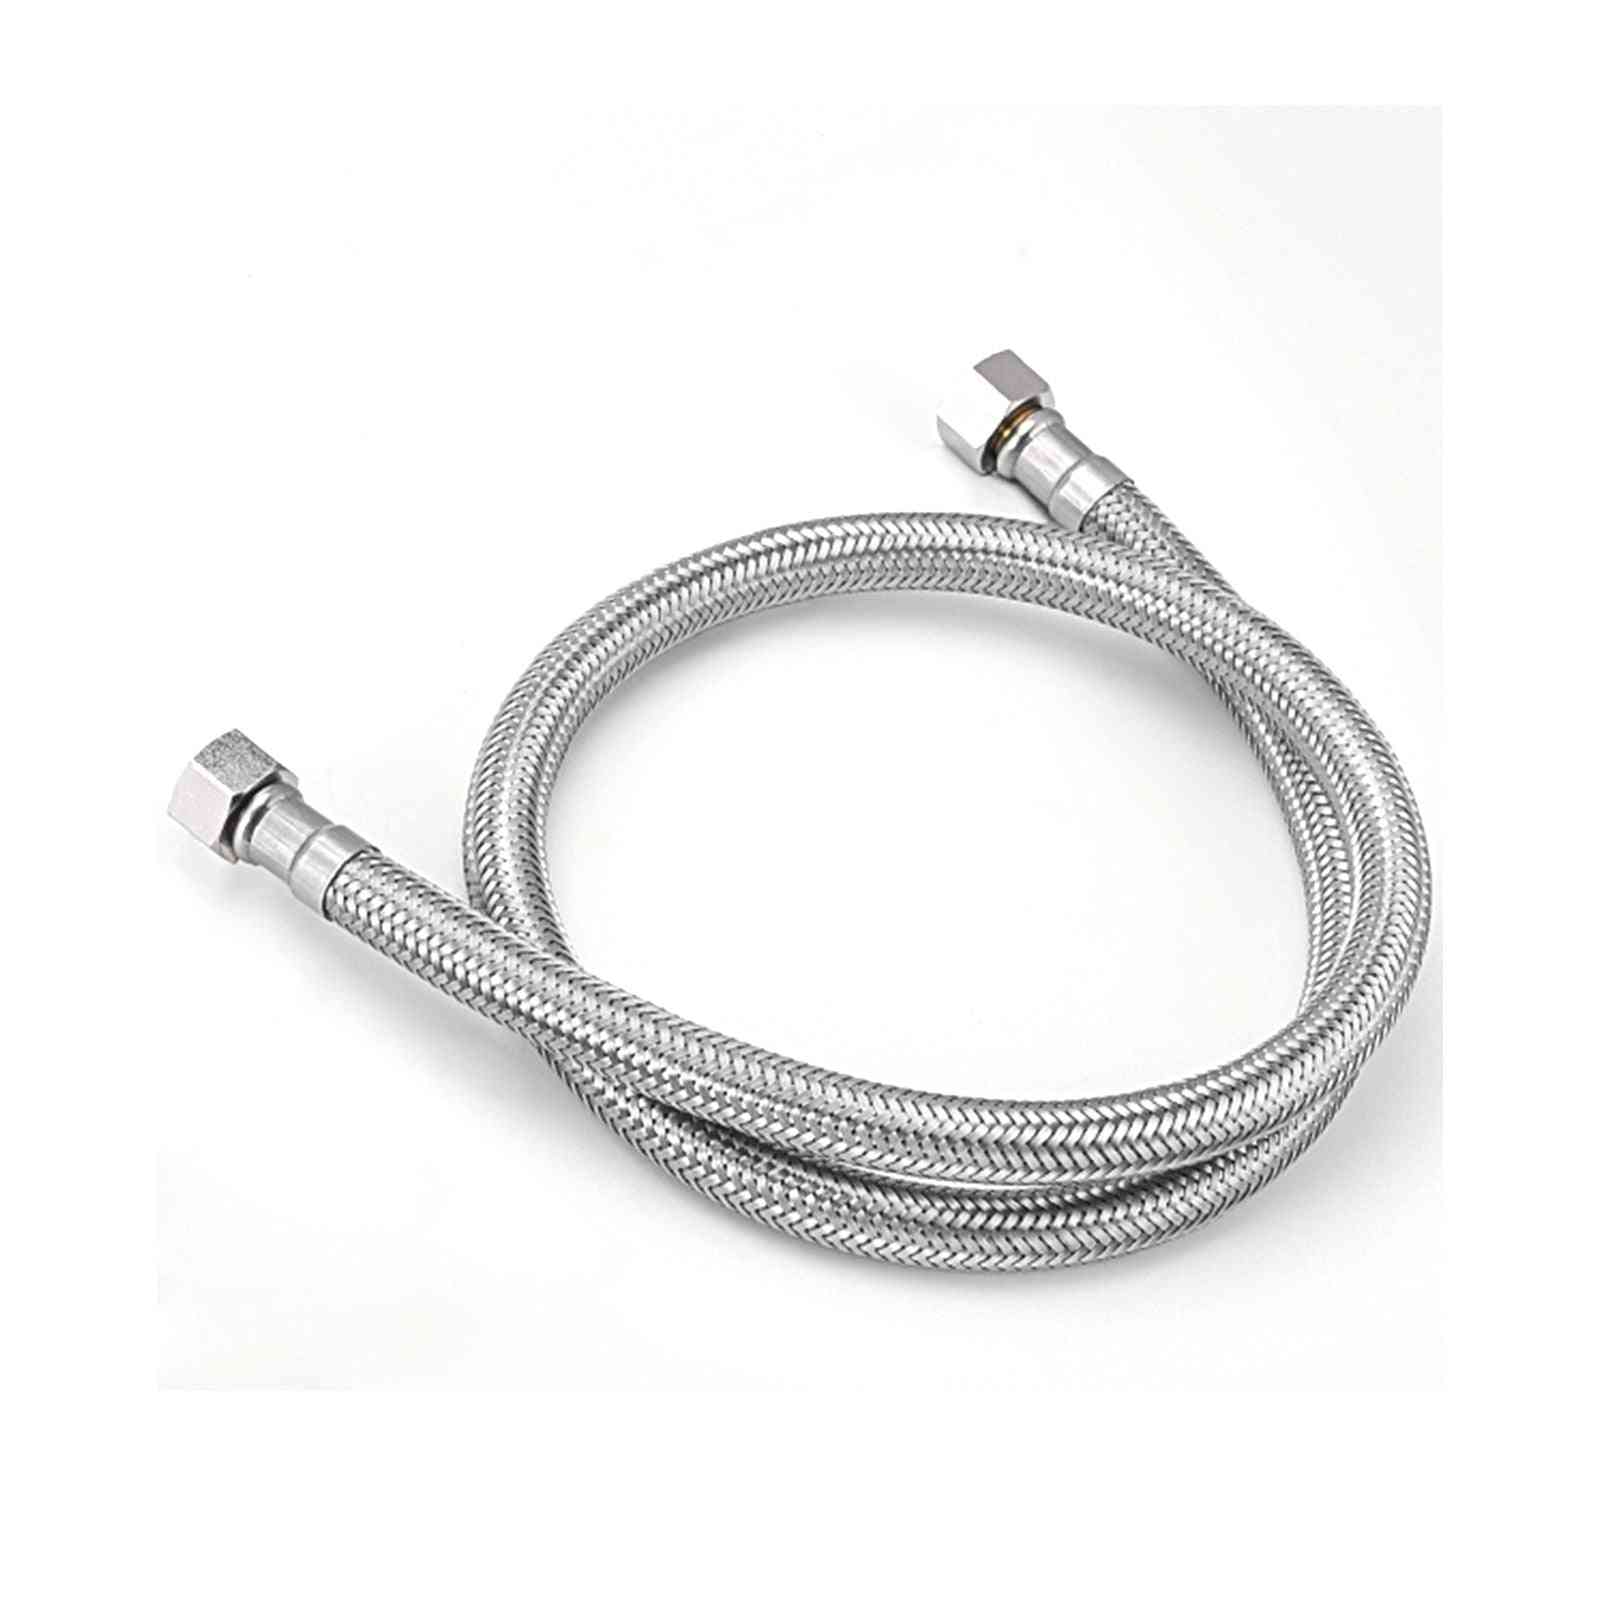 Bidet Extension Hose For Rotary Bathroom Accessories